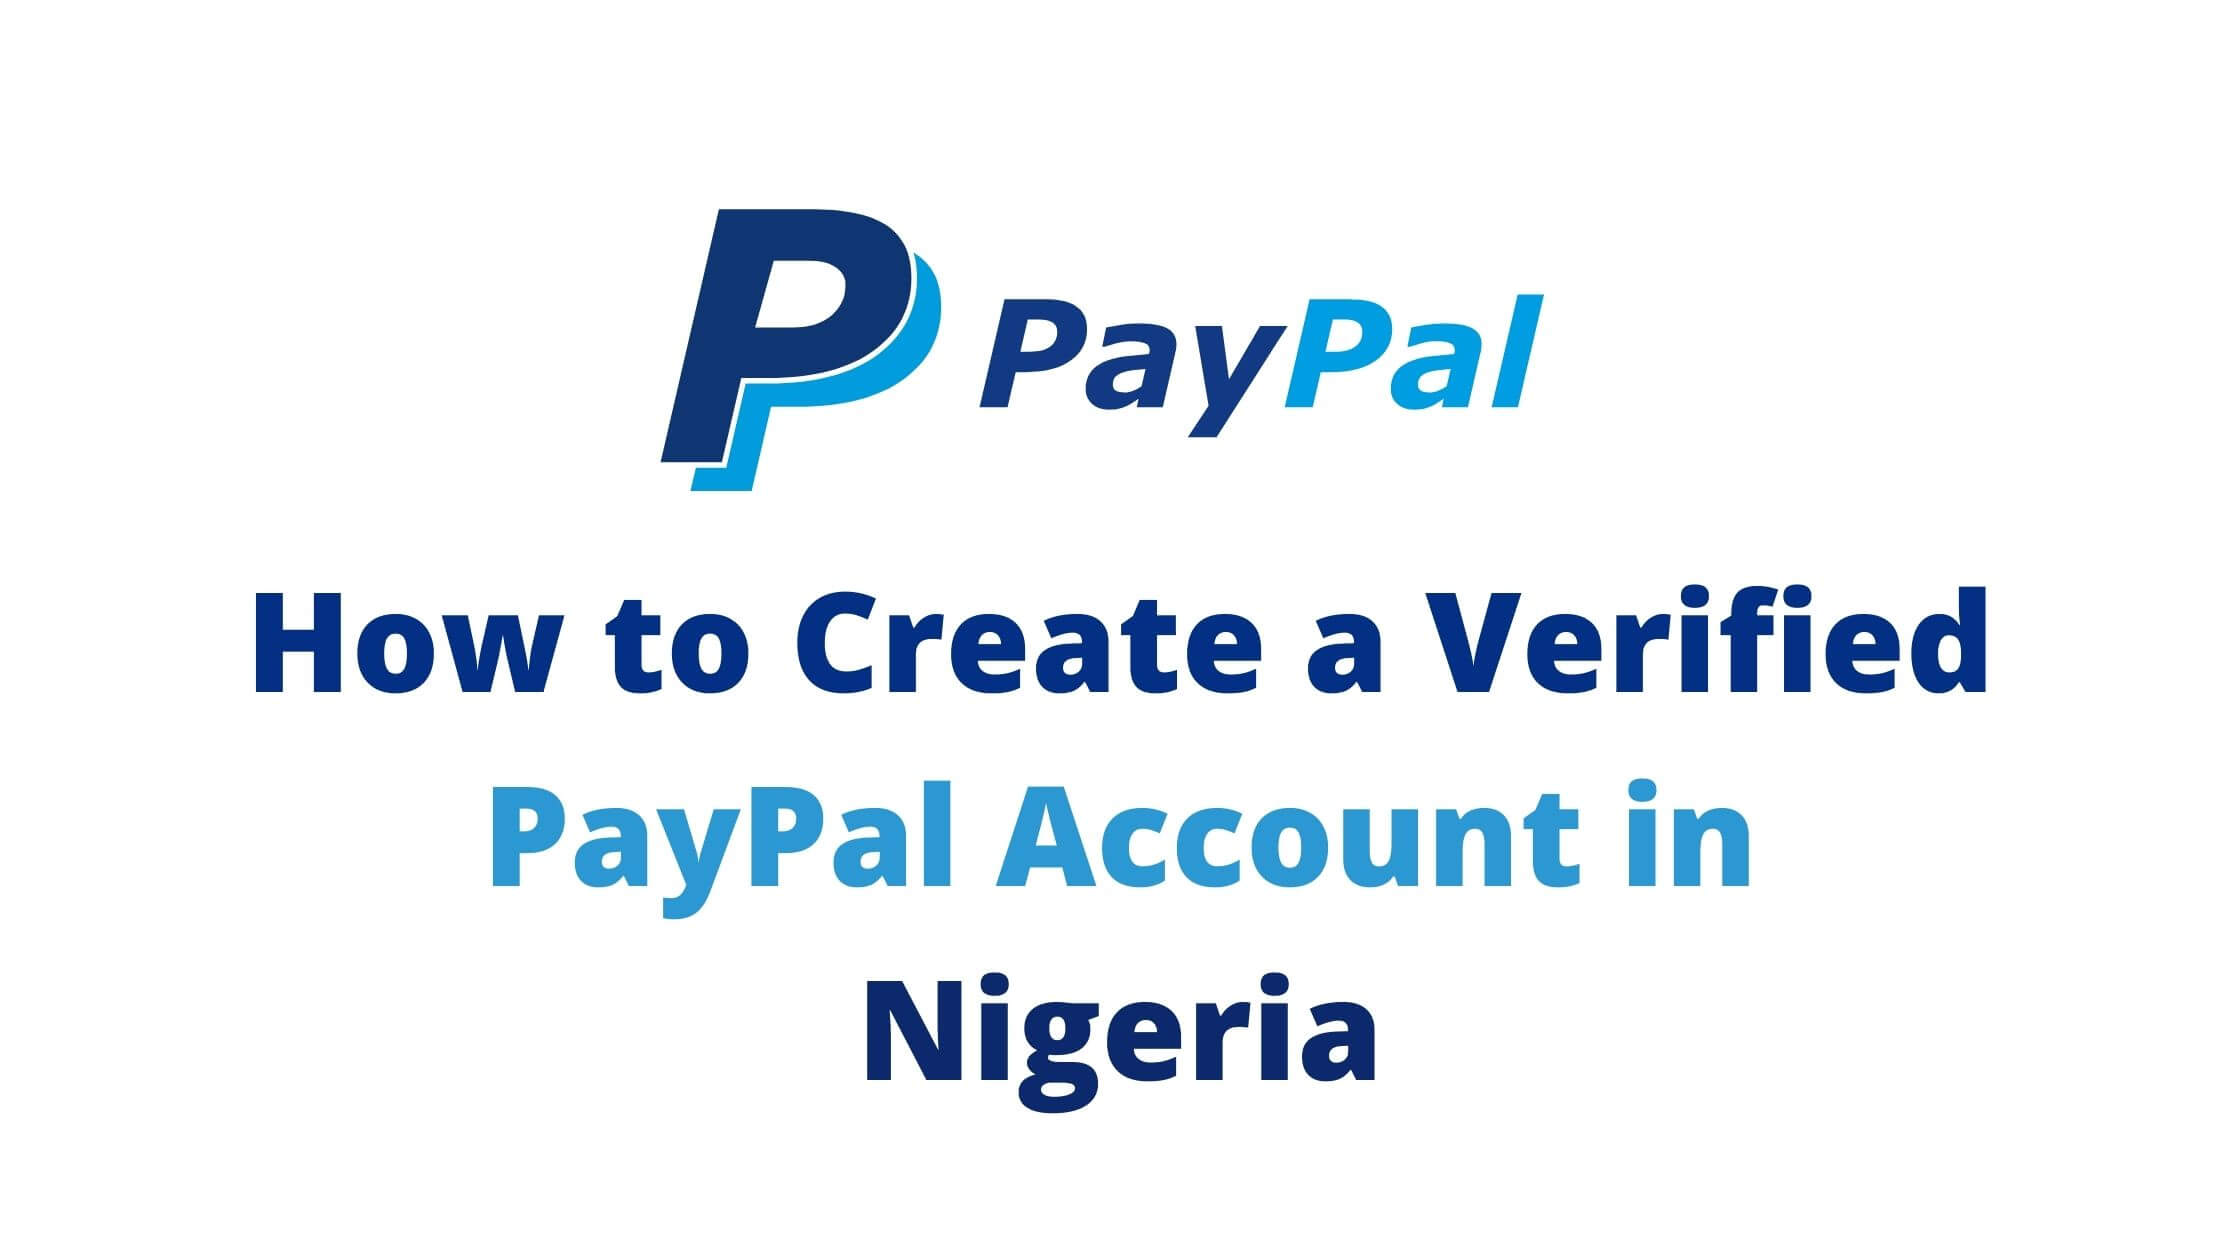 How to create a PayPal account in Nigeria